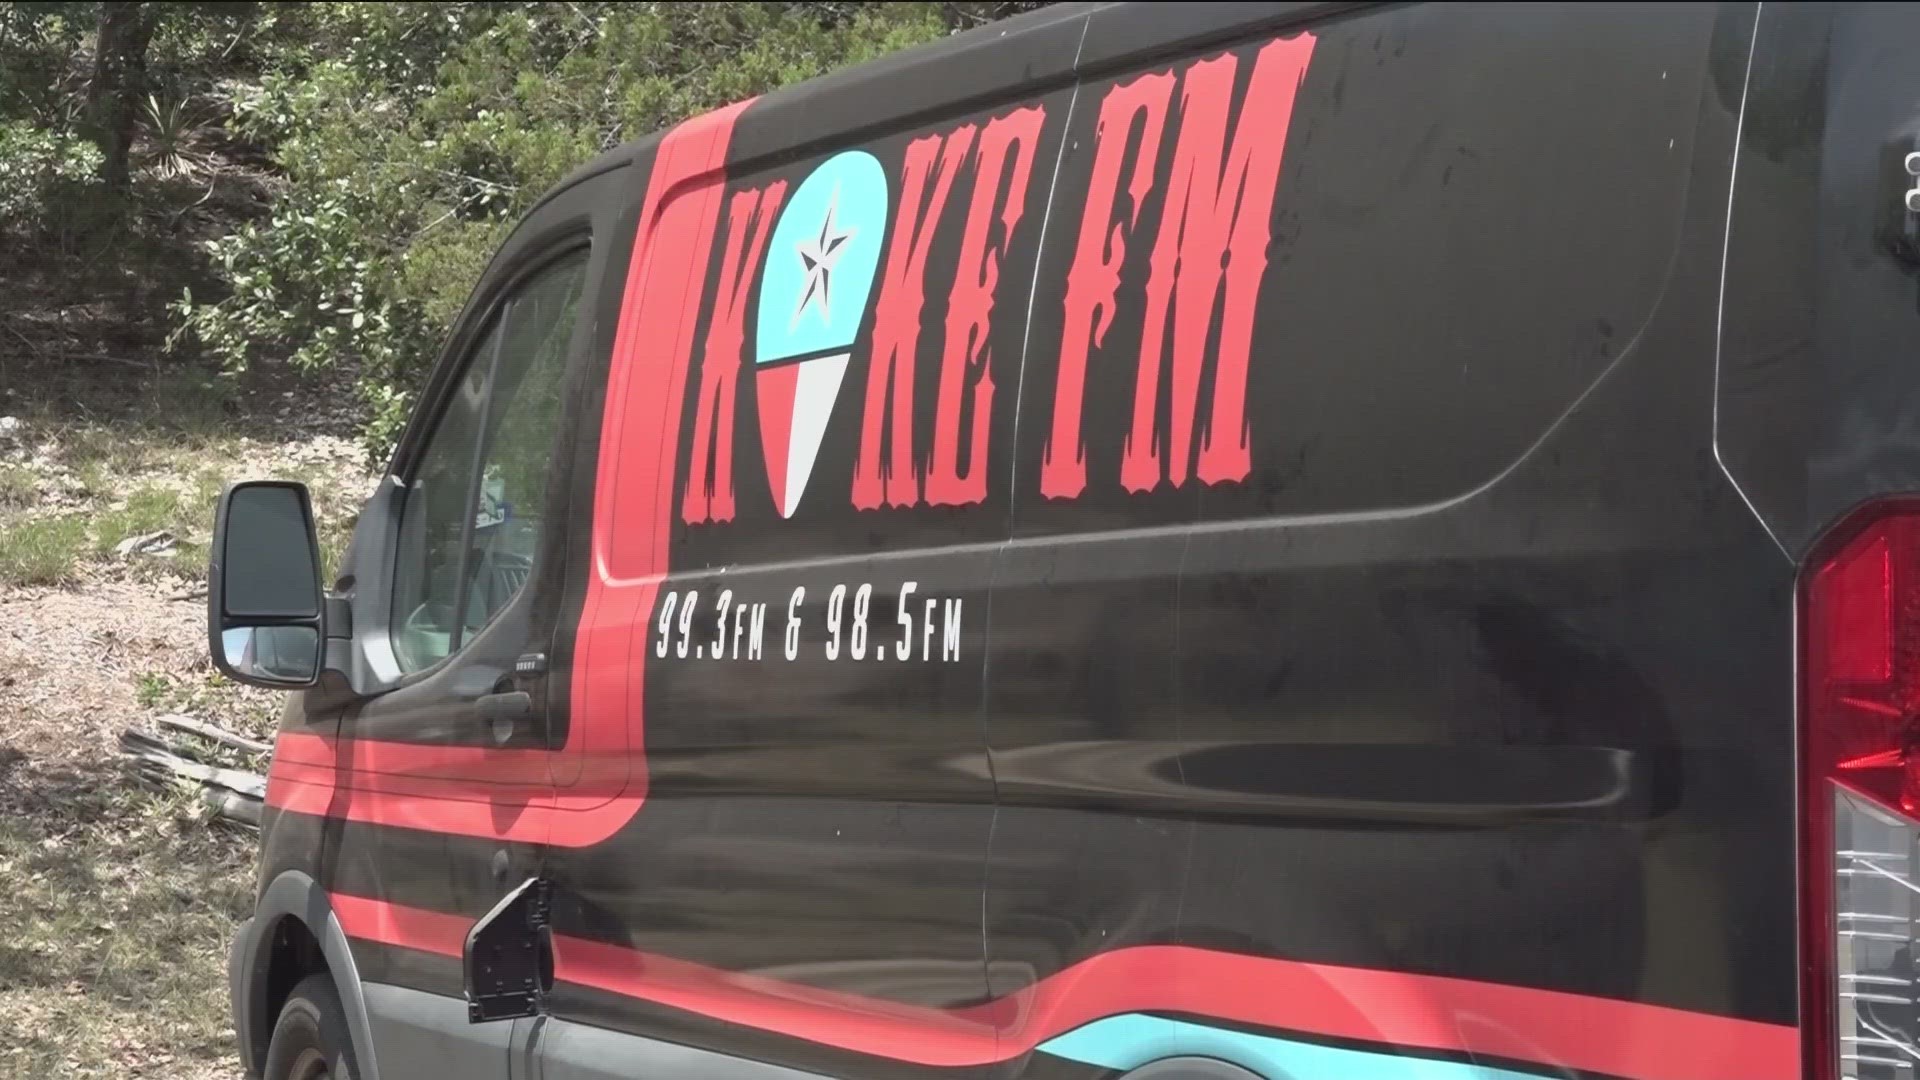 Austin Radio Network, which operates KOKE FM, The Horn and The Bat can't run local programming. The group is in a dispute with its landlord over money.